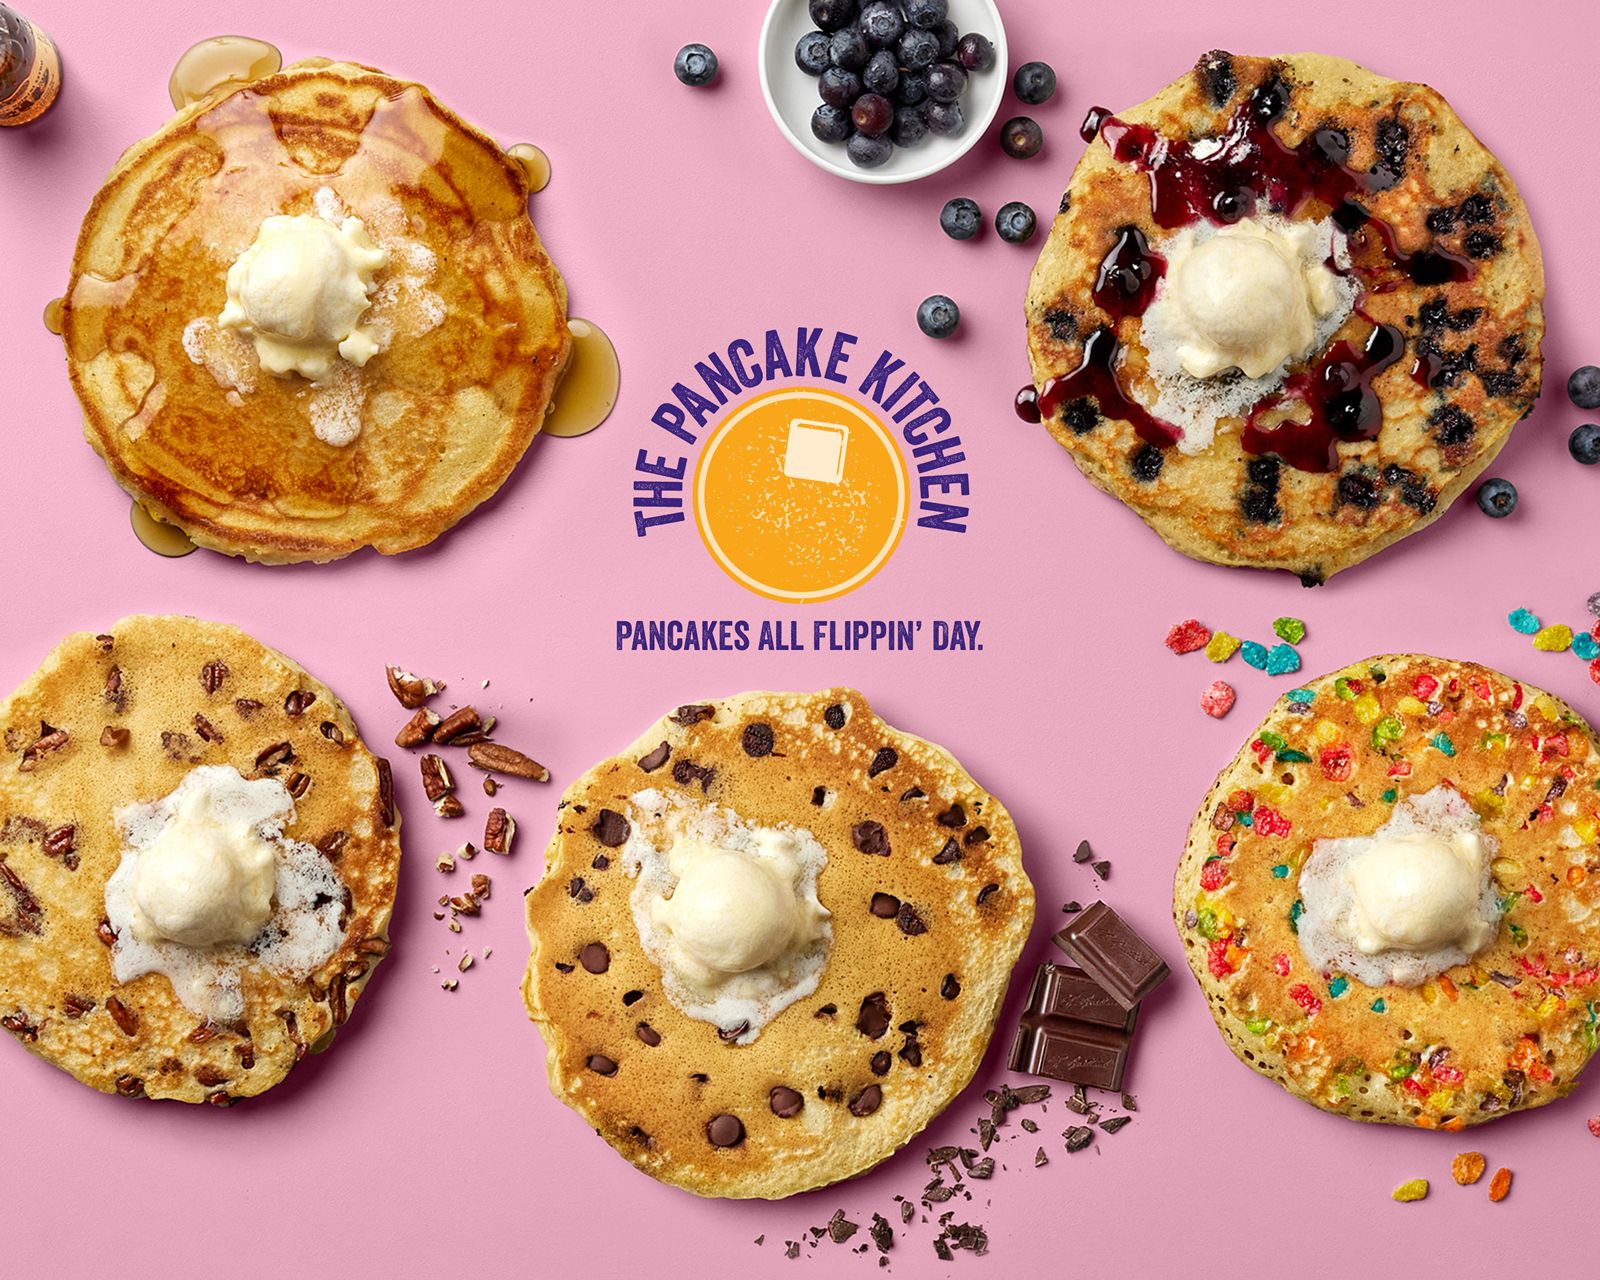 Cracker Barrel Old Country Store Makes Ordering 'Pancakes All Flippin' Day' Easier than Ever with Expansion of The Pancake Kitchen